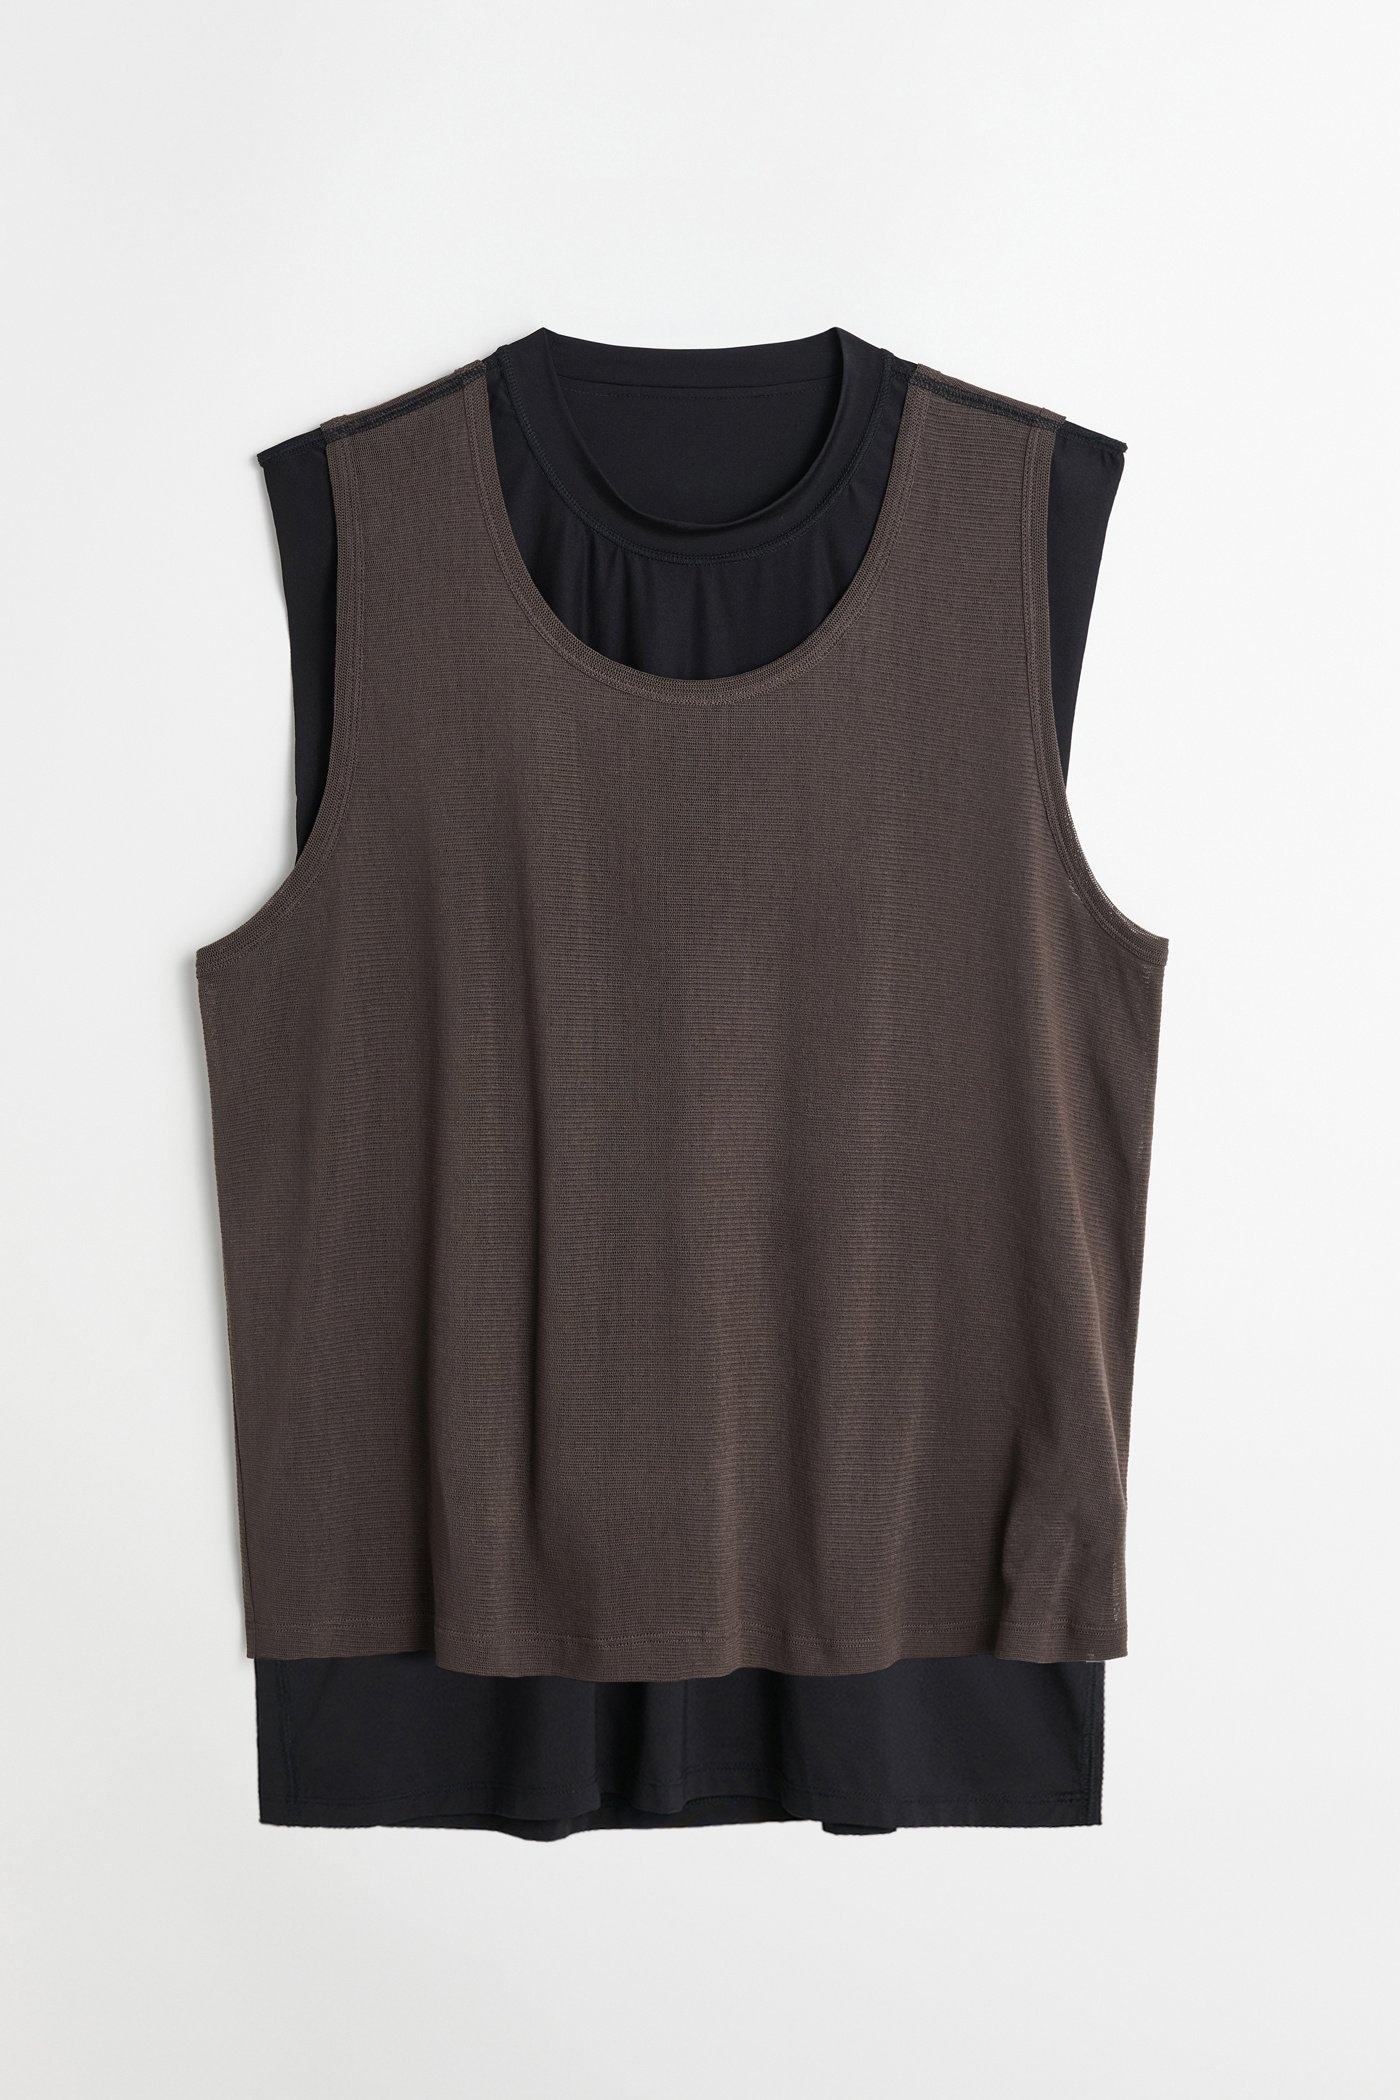 Reversible Feather Tank in Black/Antique Chocolate - 1